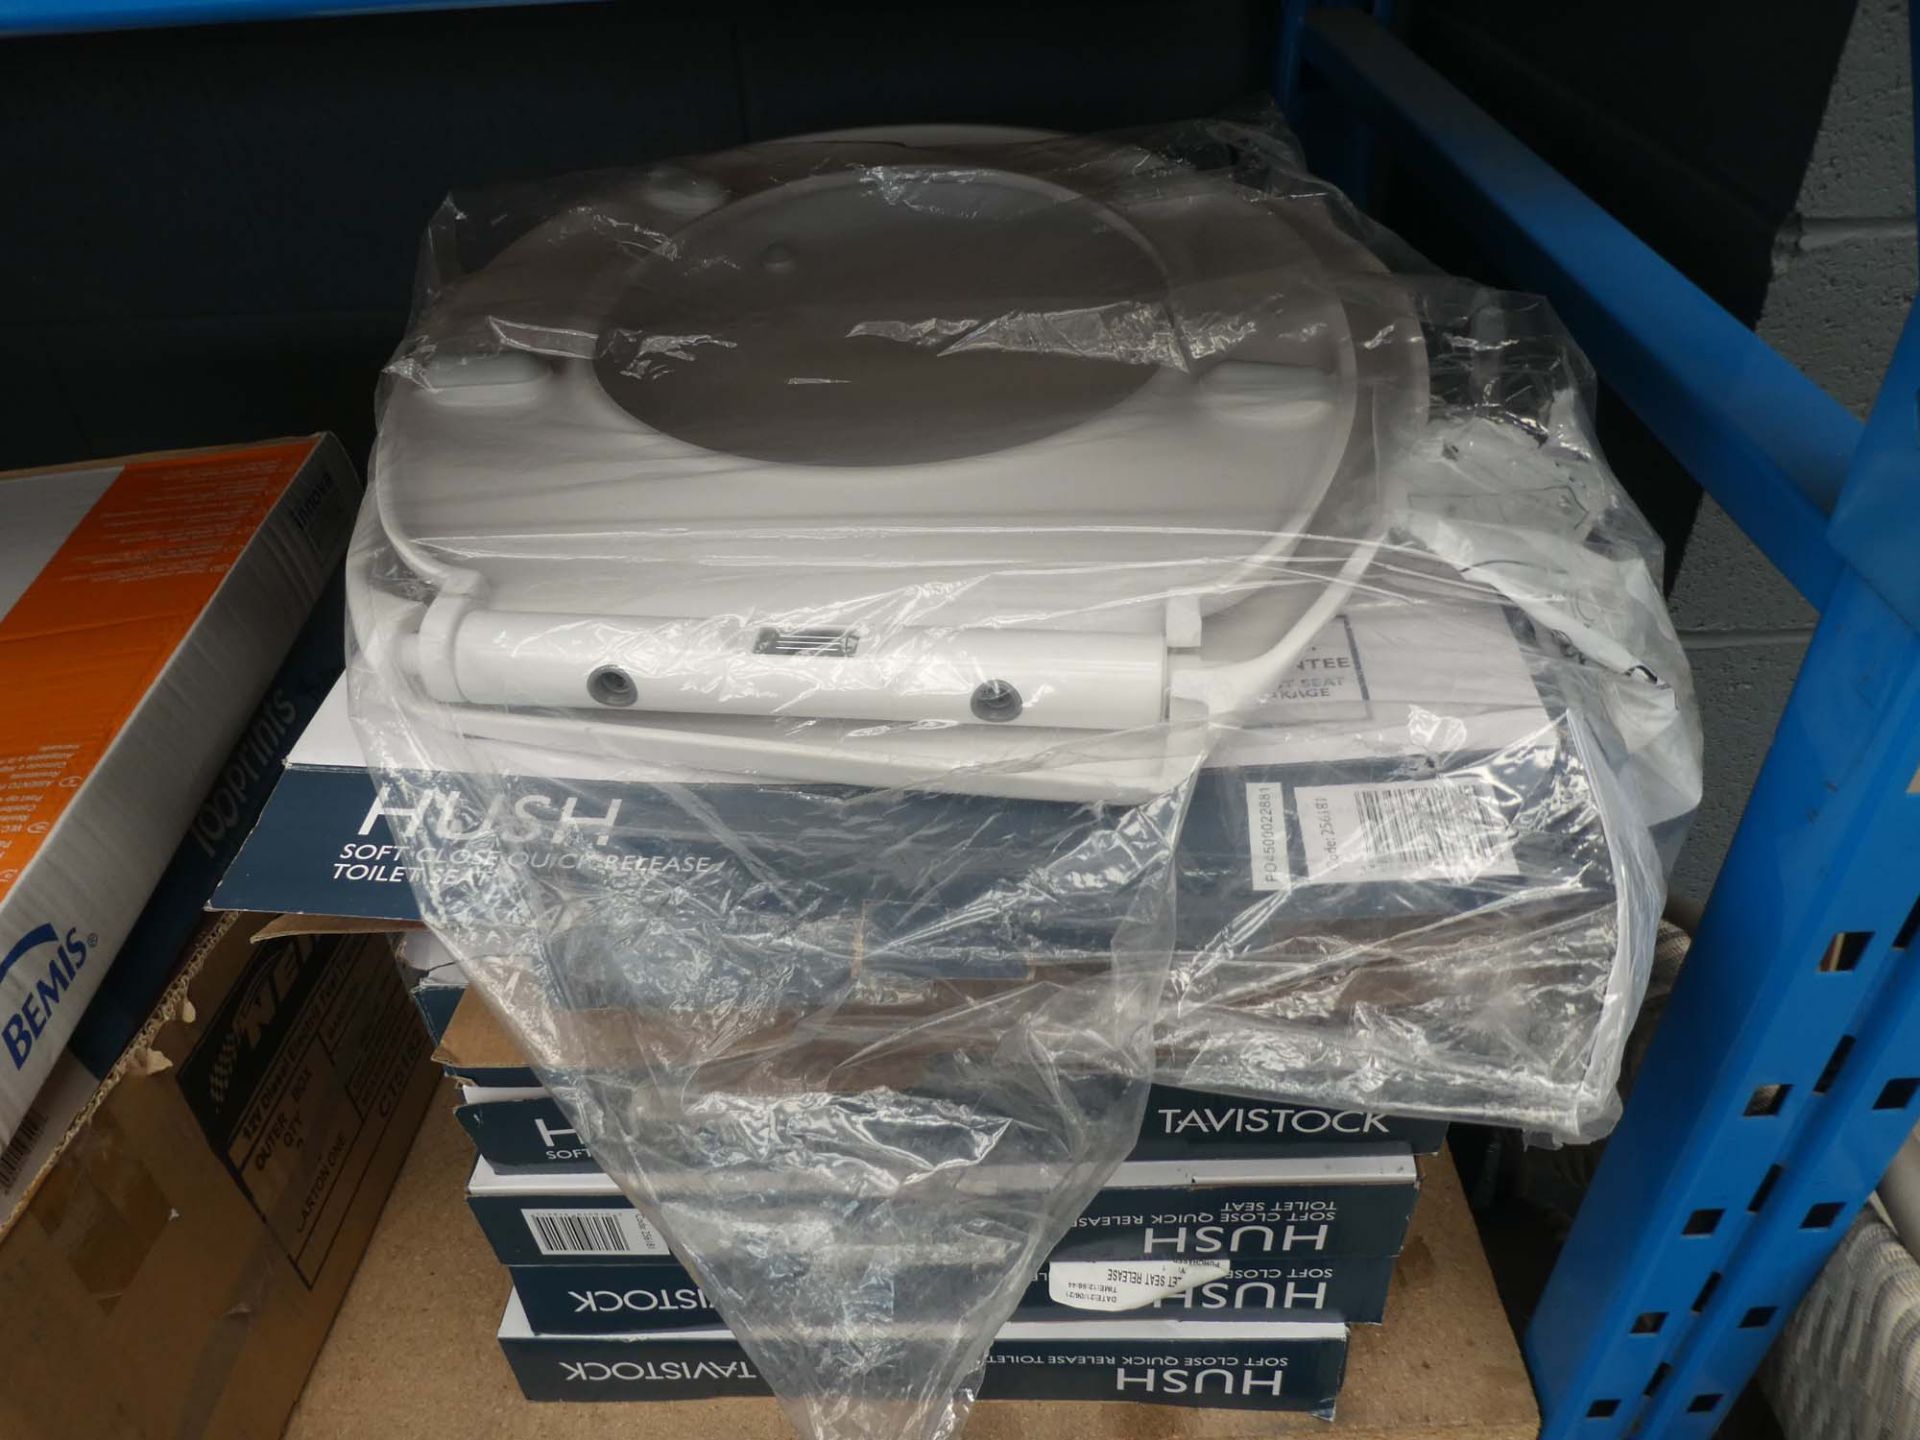 7 boxed and 1 unboxed Tavistock toilet seats